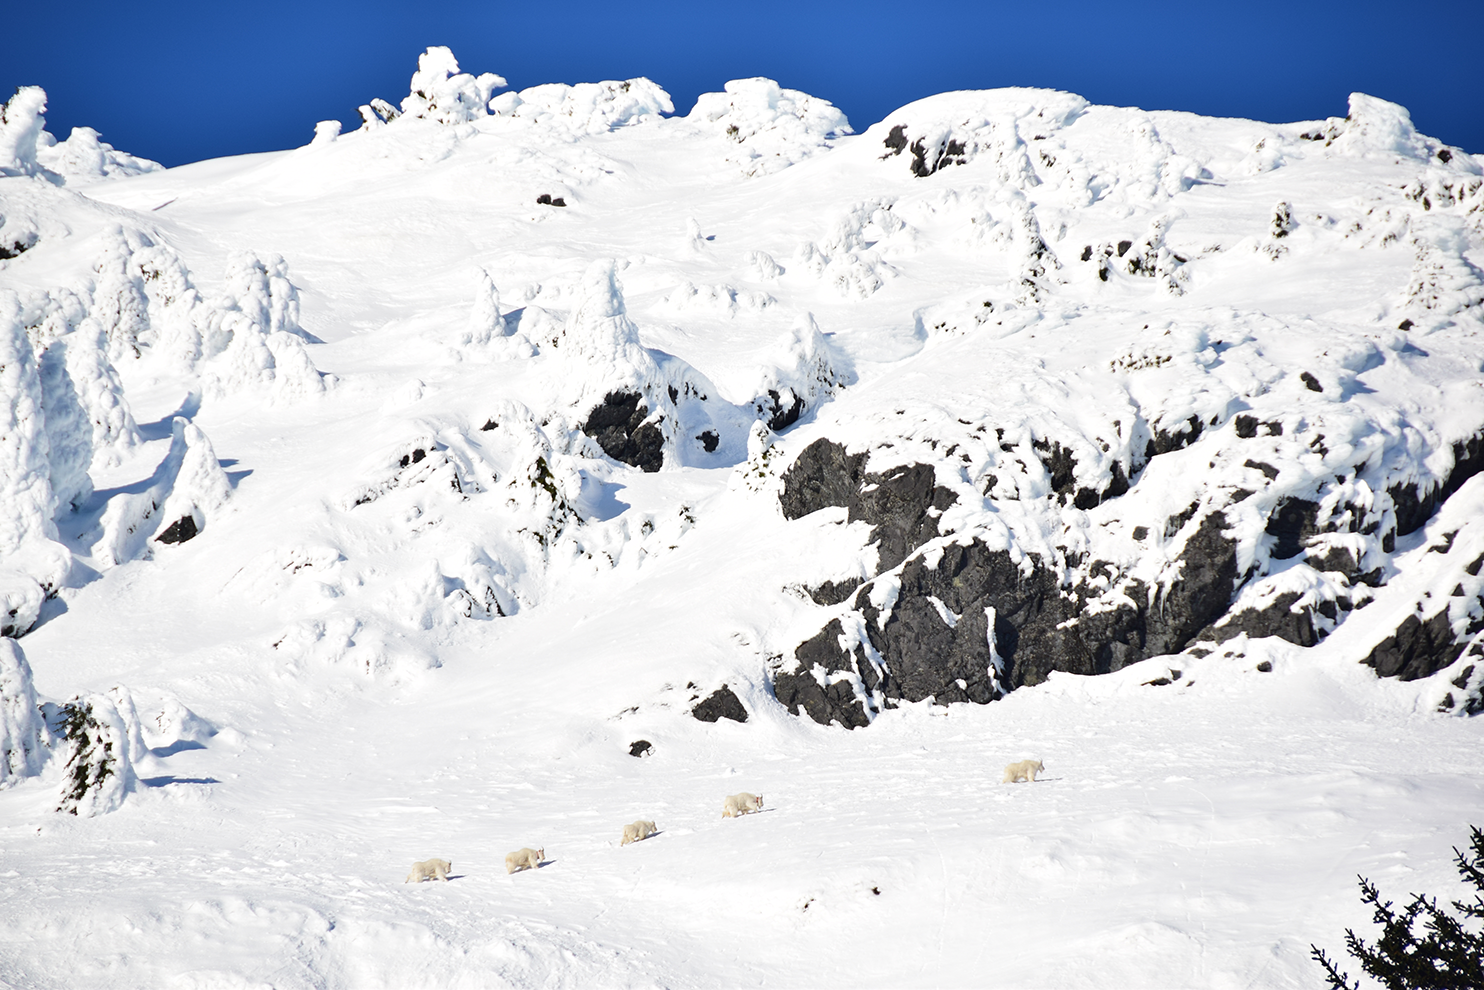 Five adult mountain goats traversing below steep, snow loaded avalanche-prone slopes.